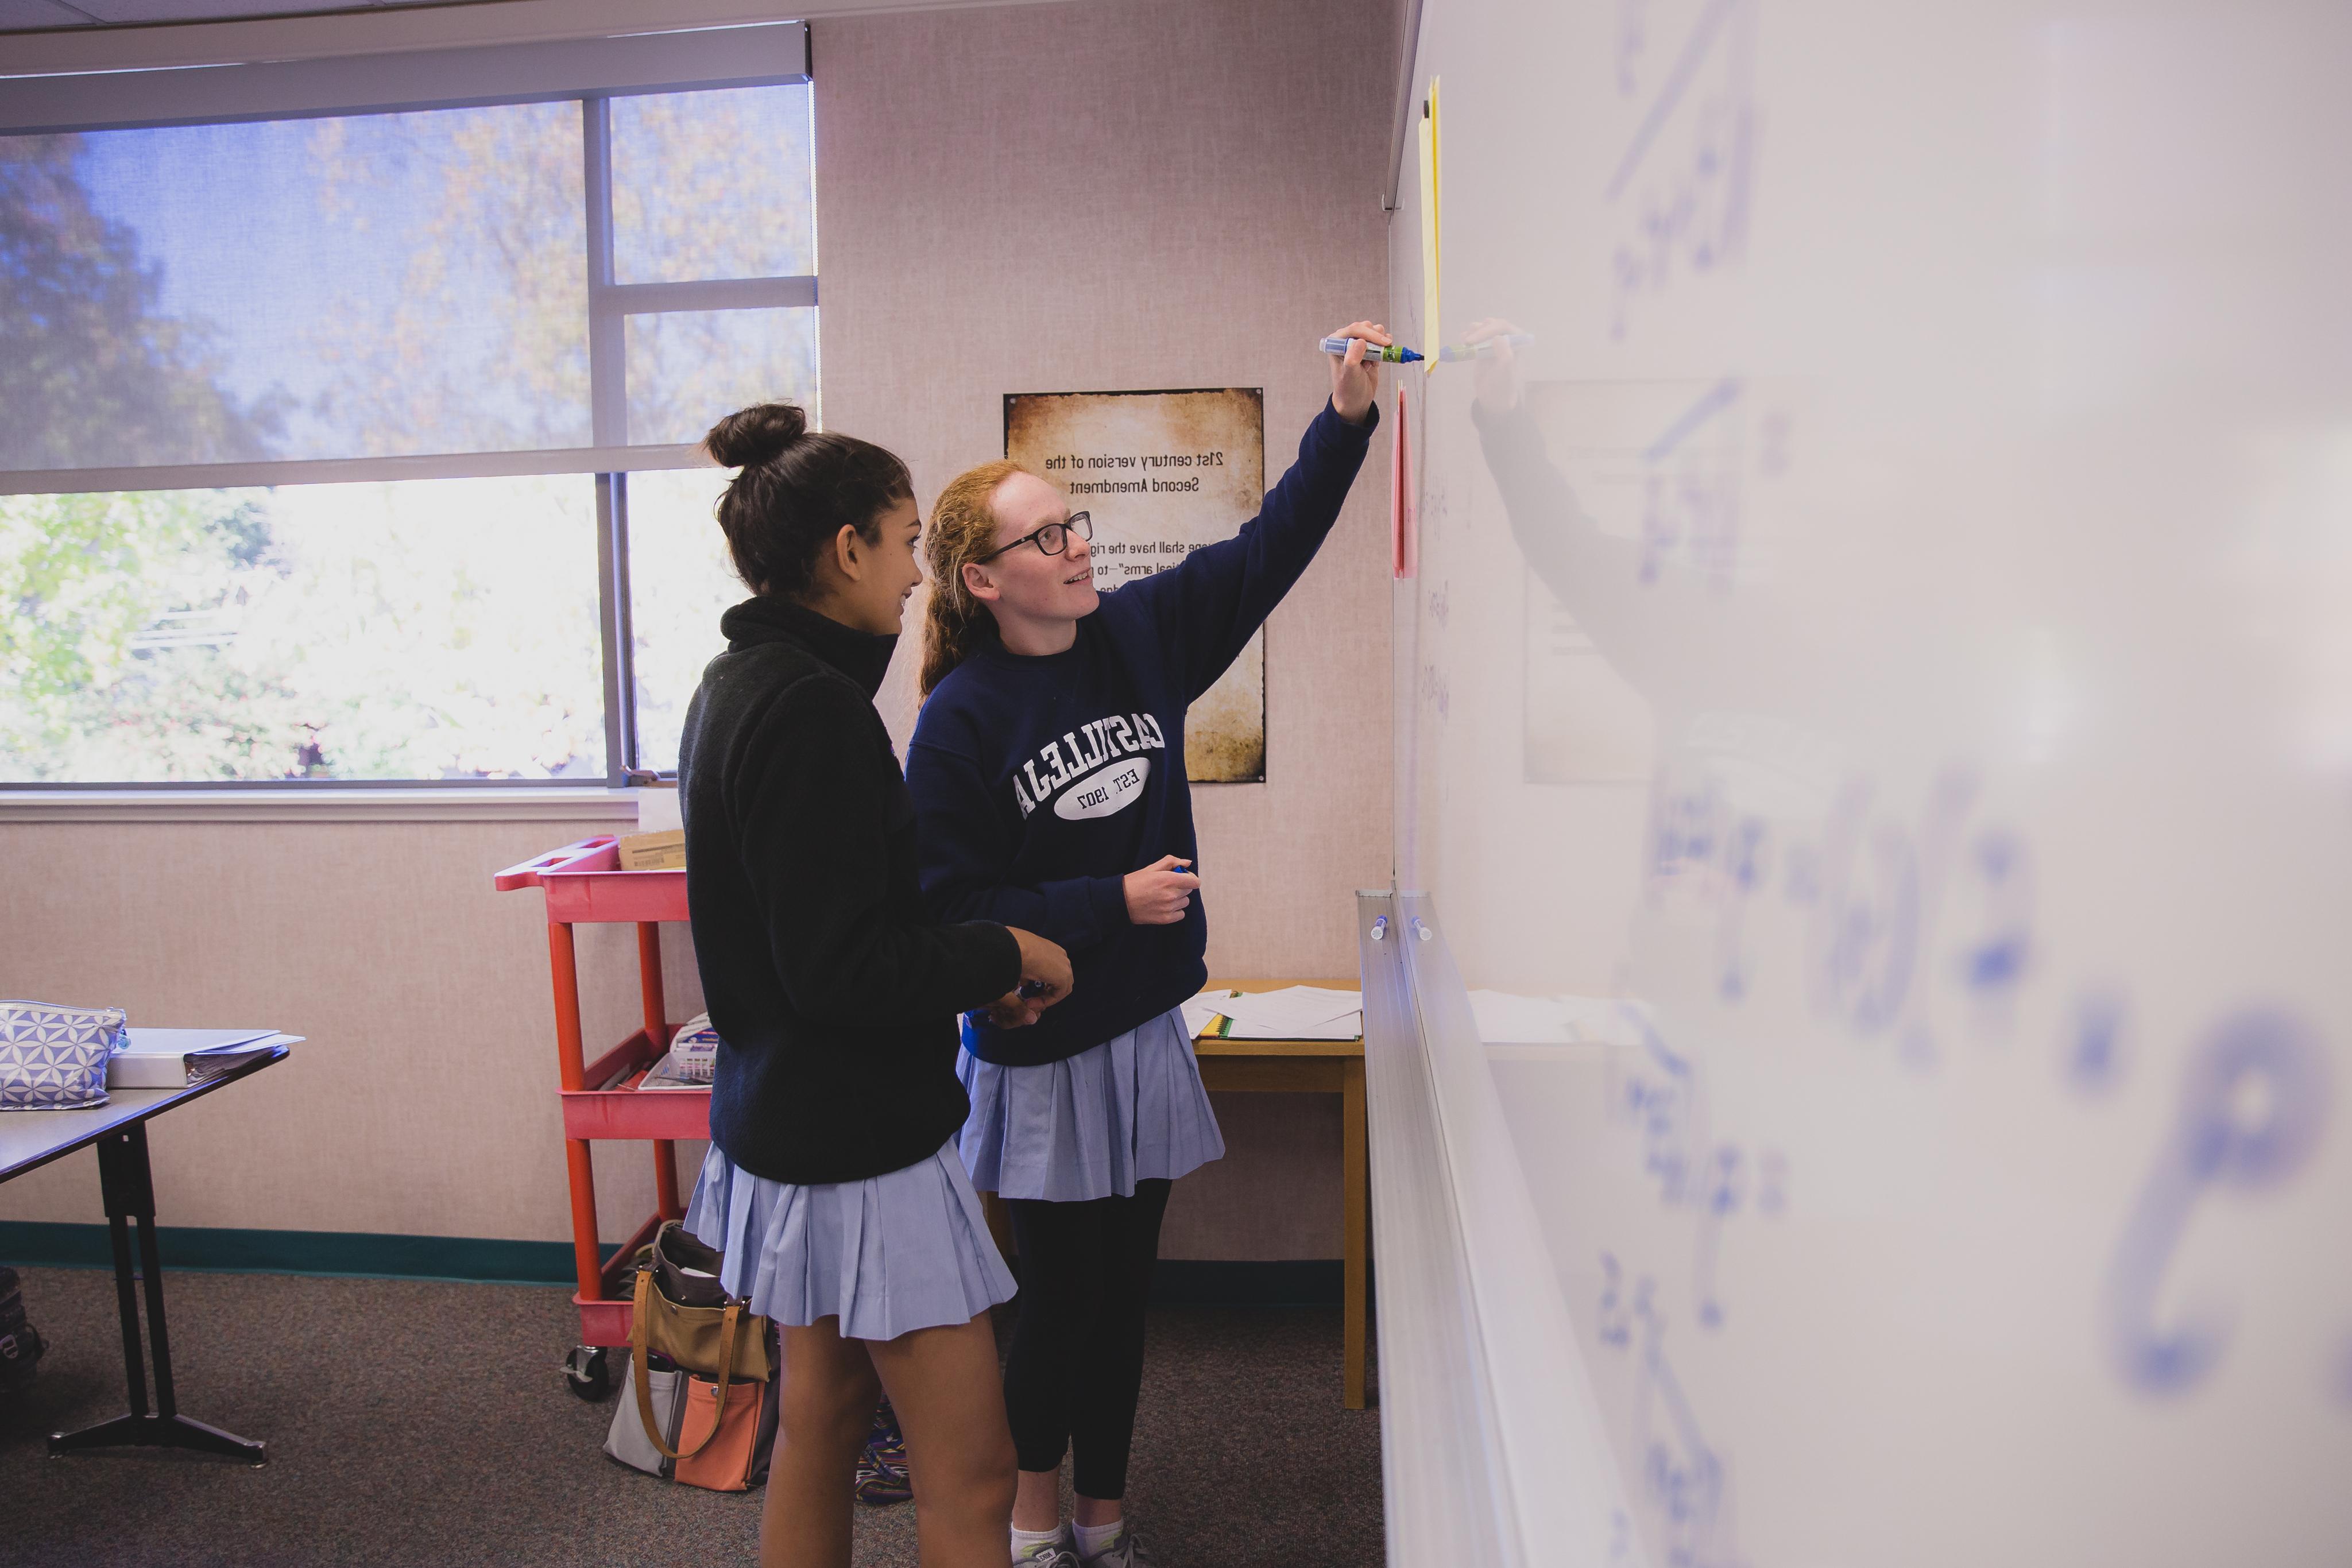 Math students work in pairs to figure out the best approach to algebraic problems